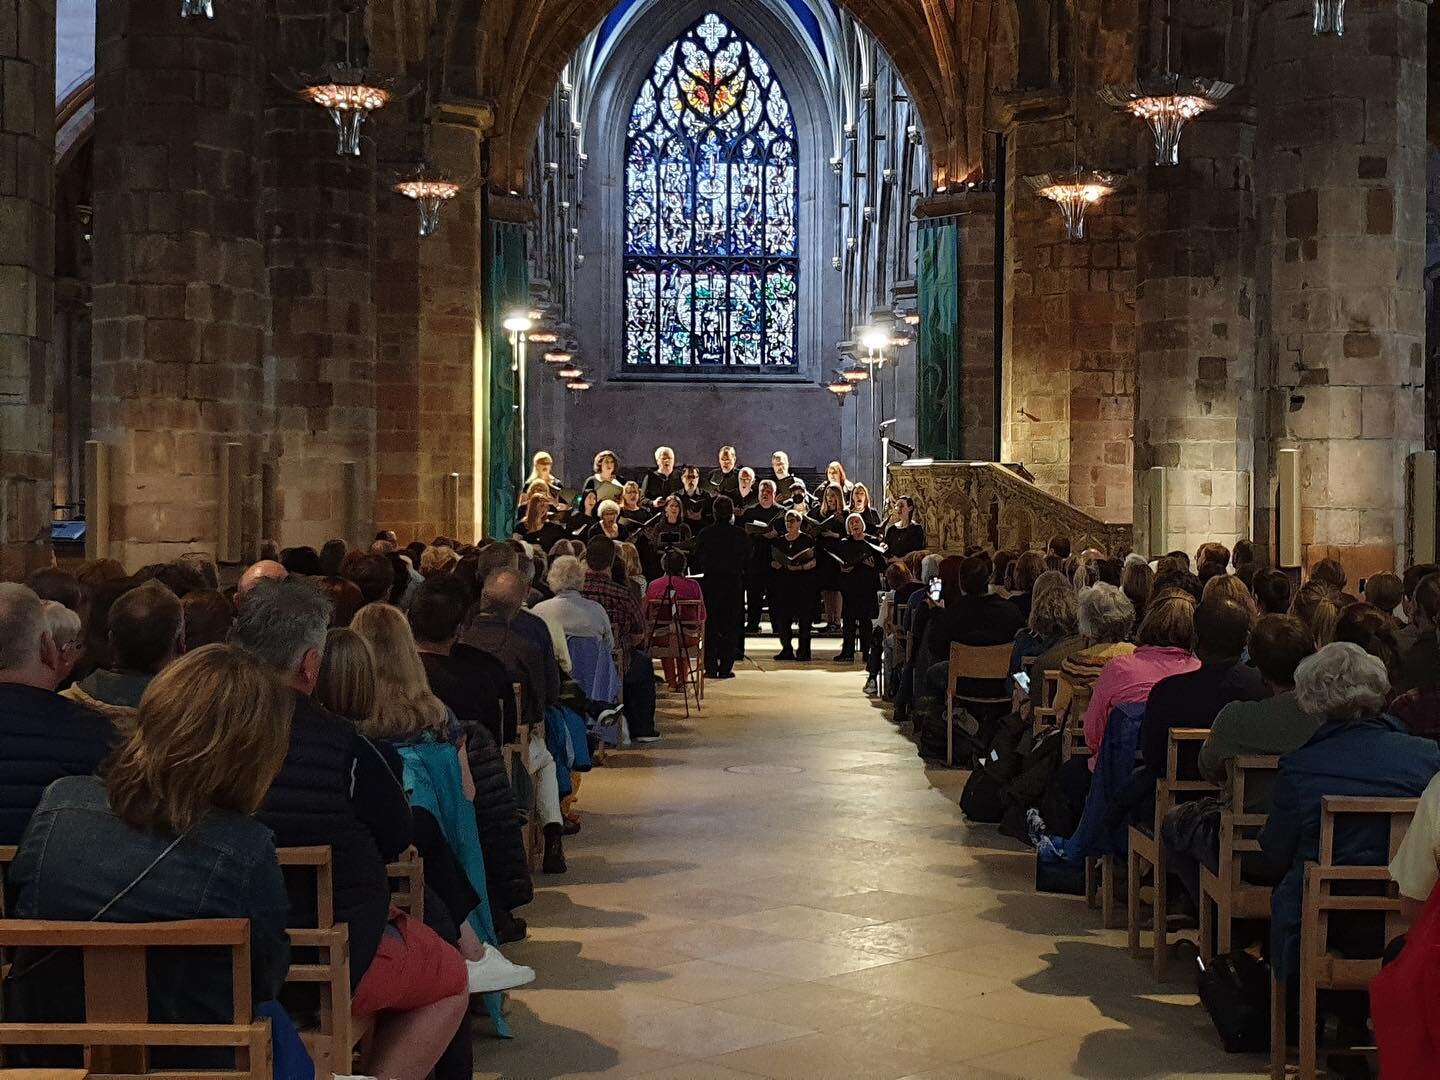 The Mill Creek Chorale from the West Coast finally made it to the UK &amp; Ireland having postponed their tour from 2020. The tour incorporated a sold out concert in Edinburgh raising funds for a local charity along the further performances in Belfas